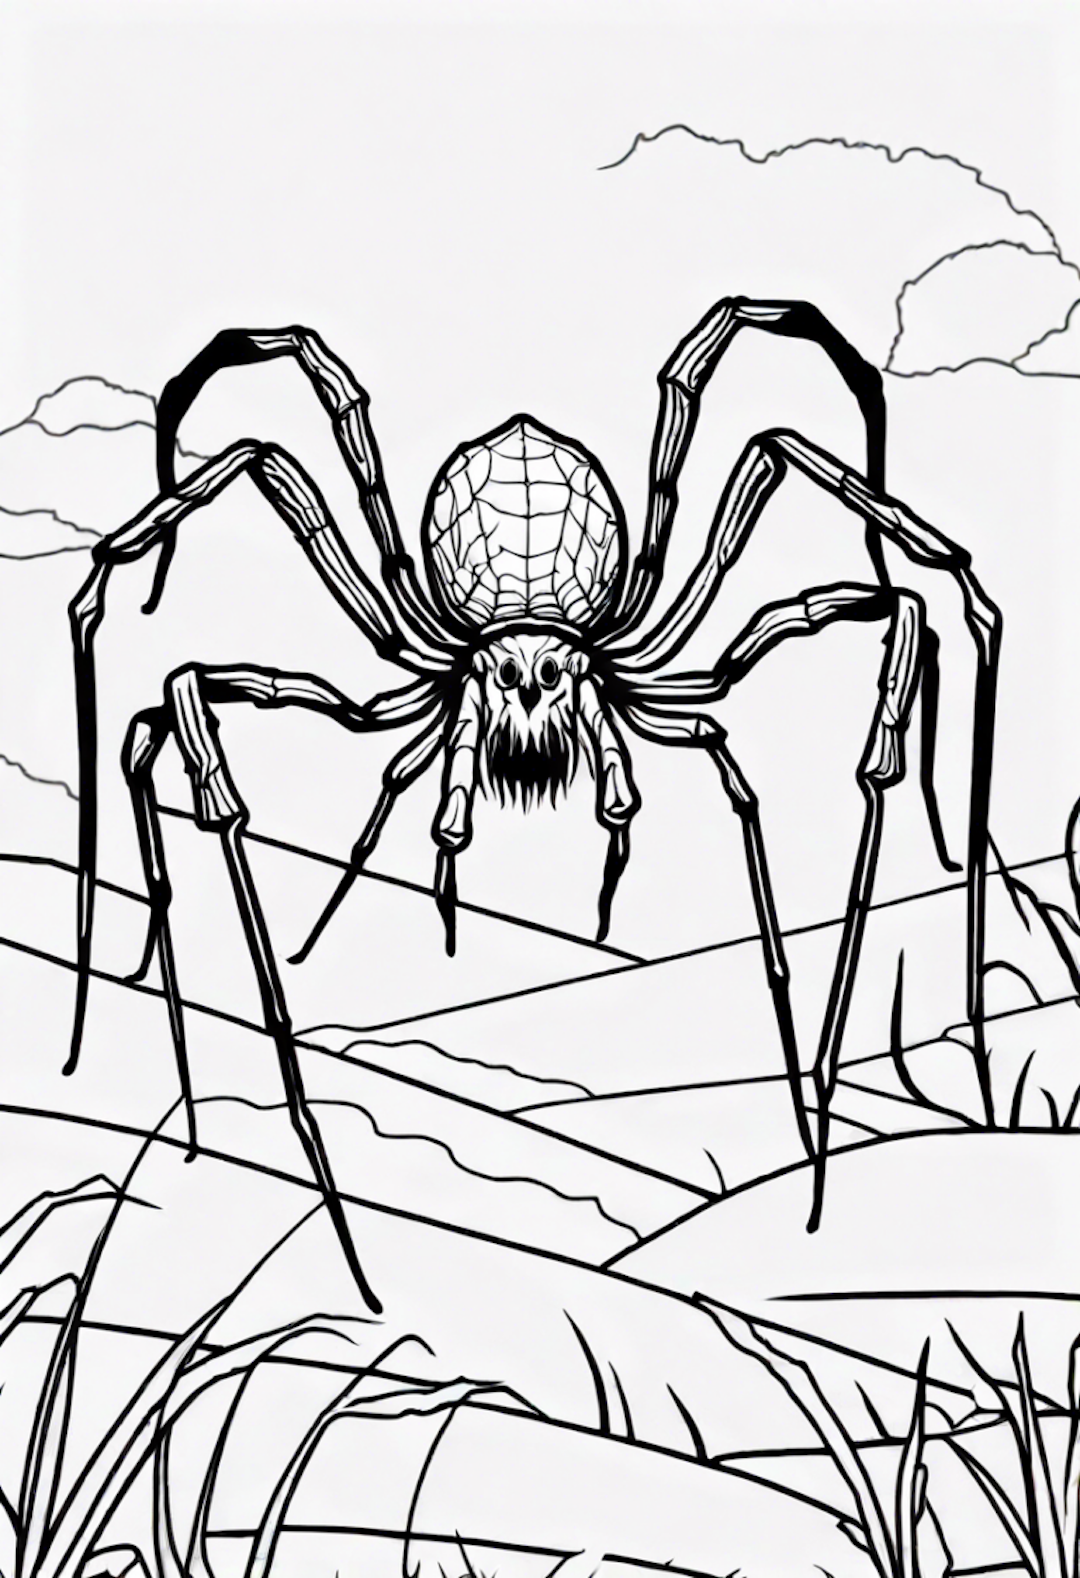 Hobo Spider coloring pages